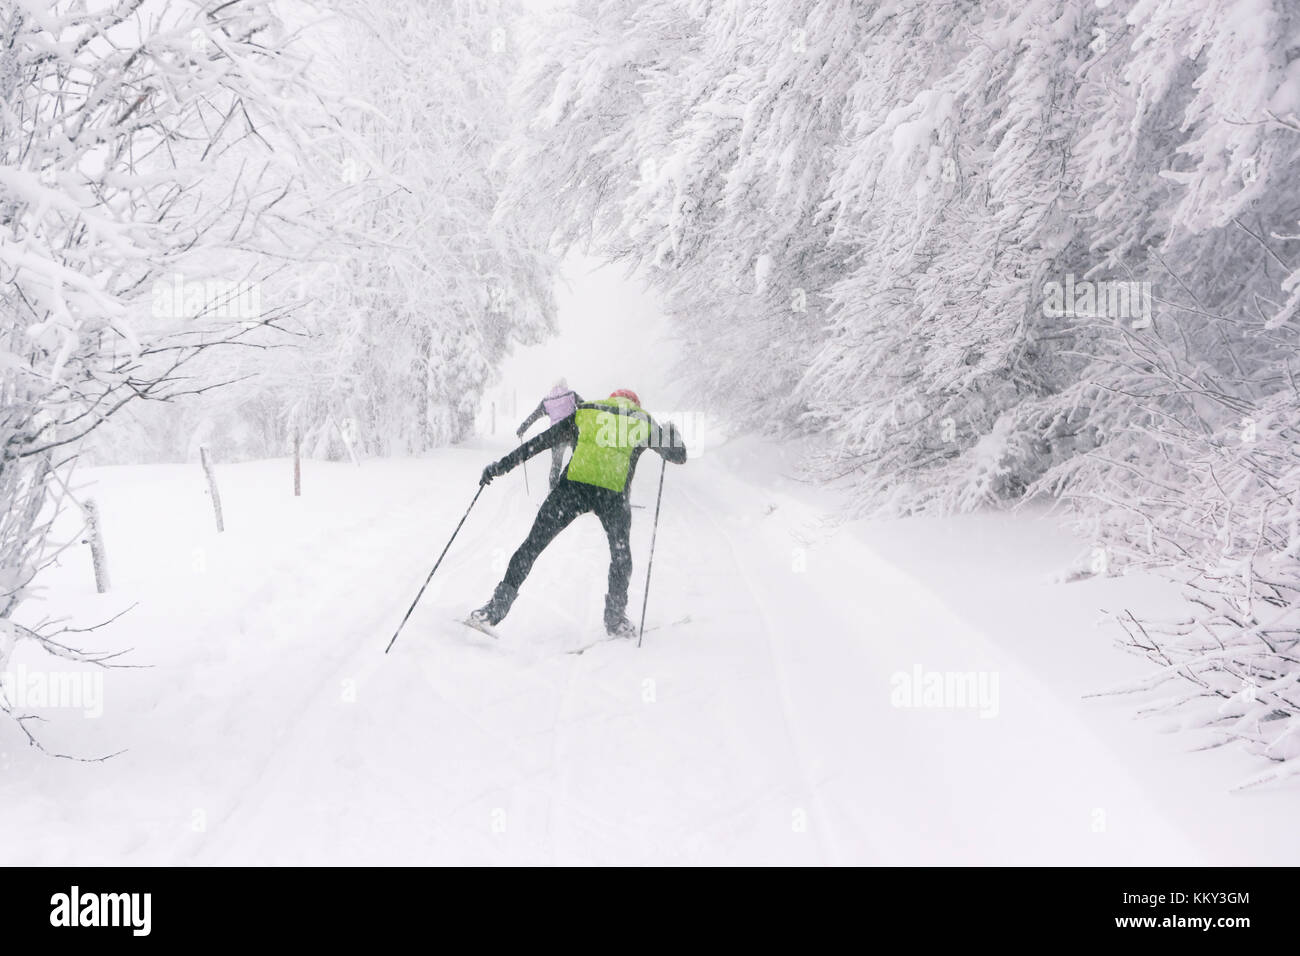 Cross country skiers practicing in a mountain forest while it's snowing heavily, Vosges mountains in winter, France. Stock Photo